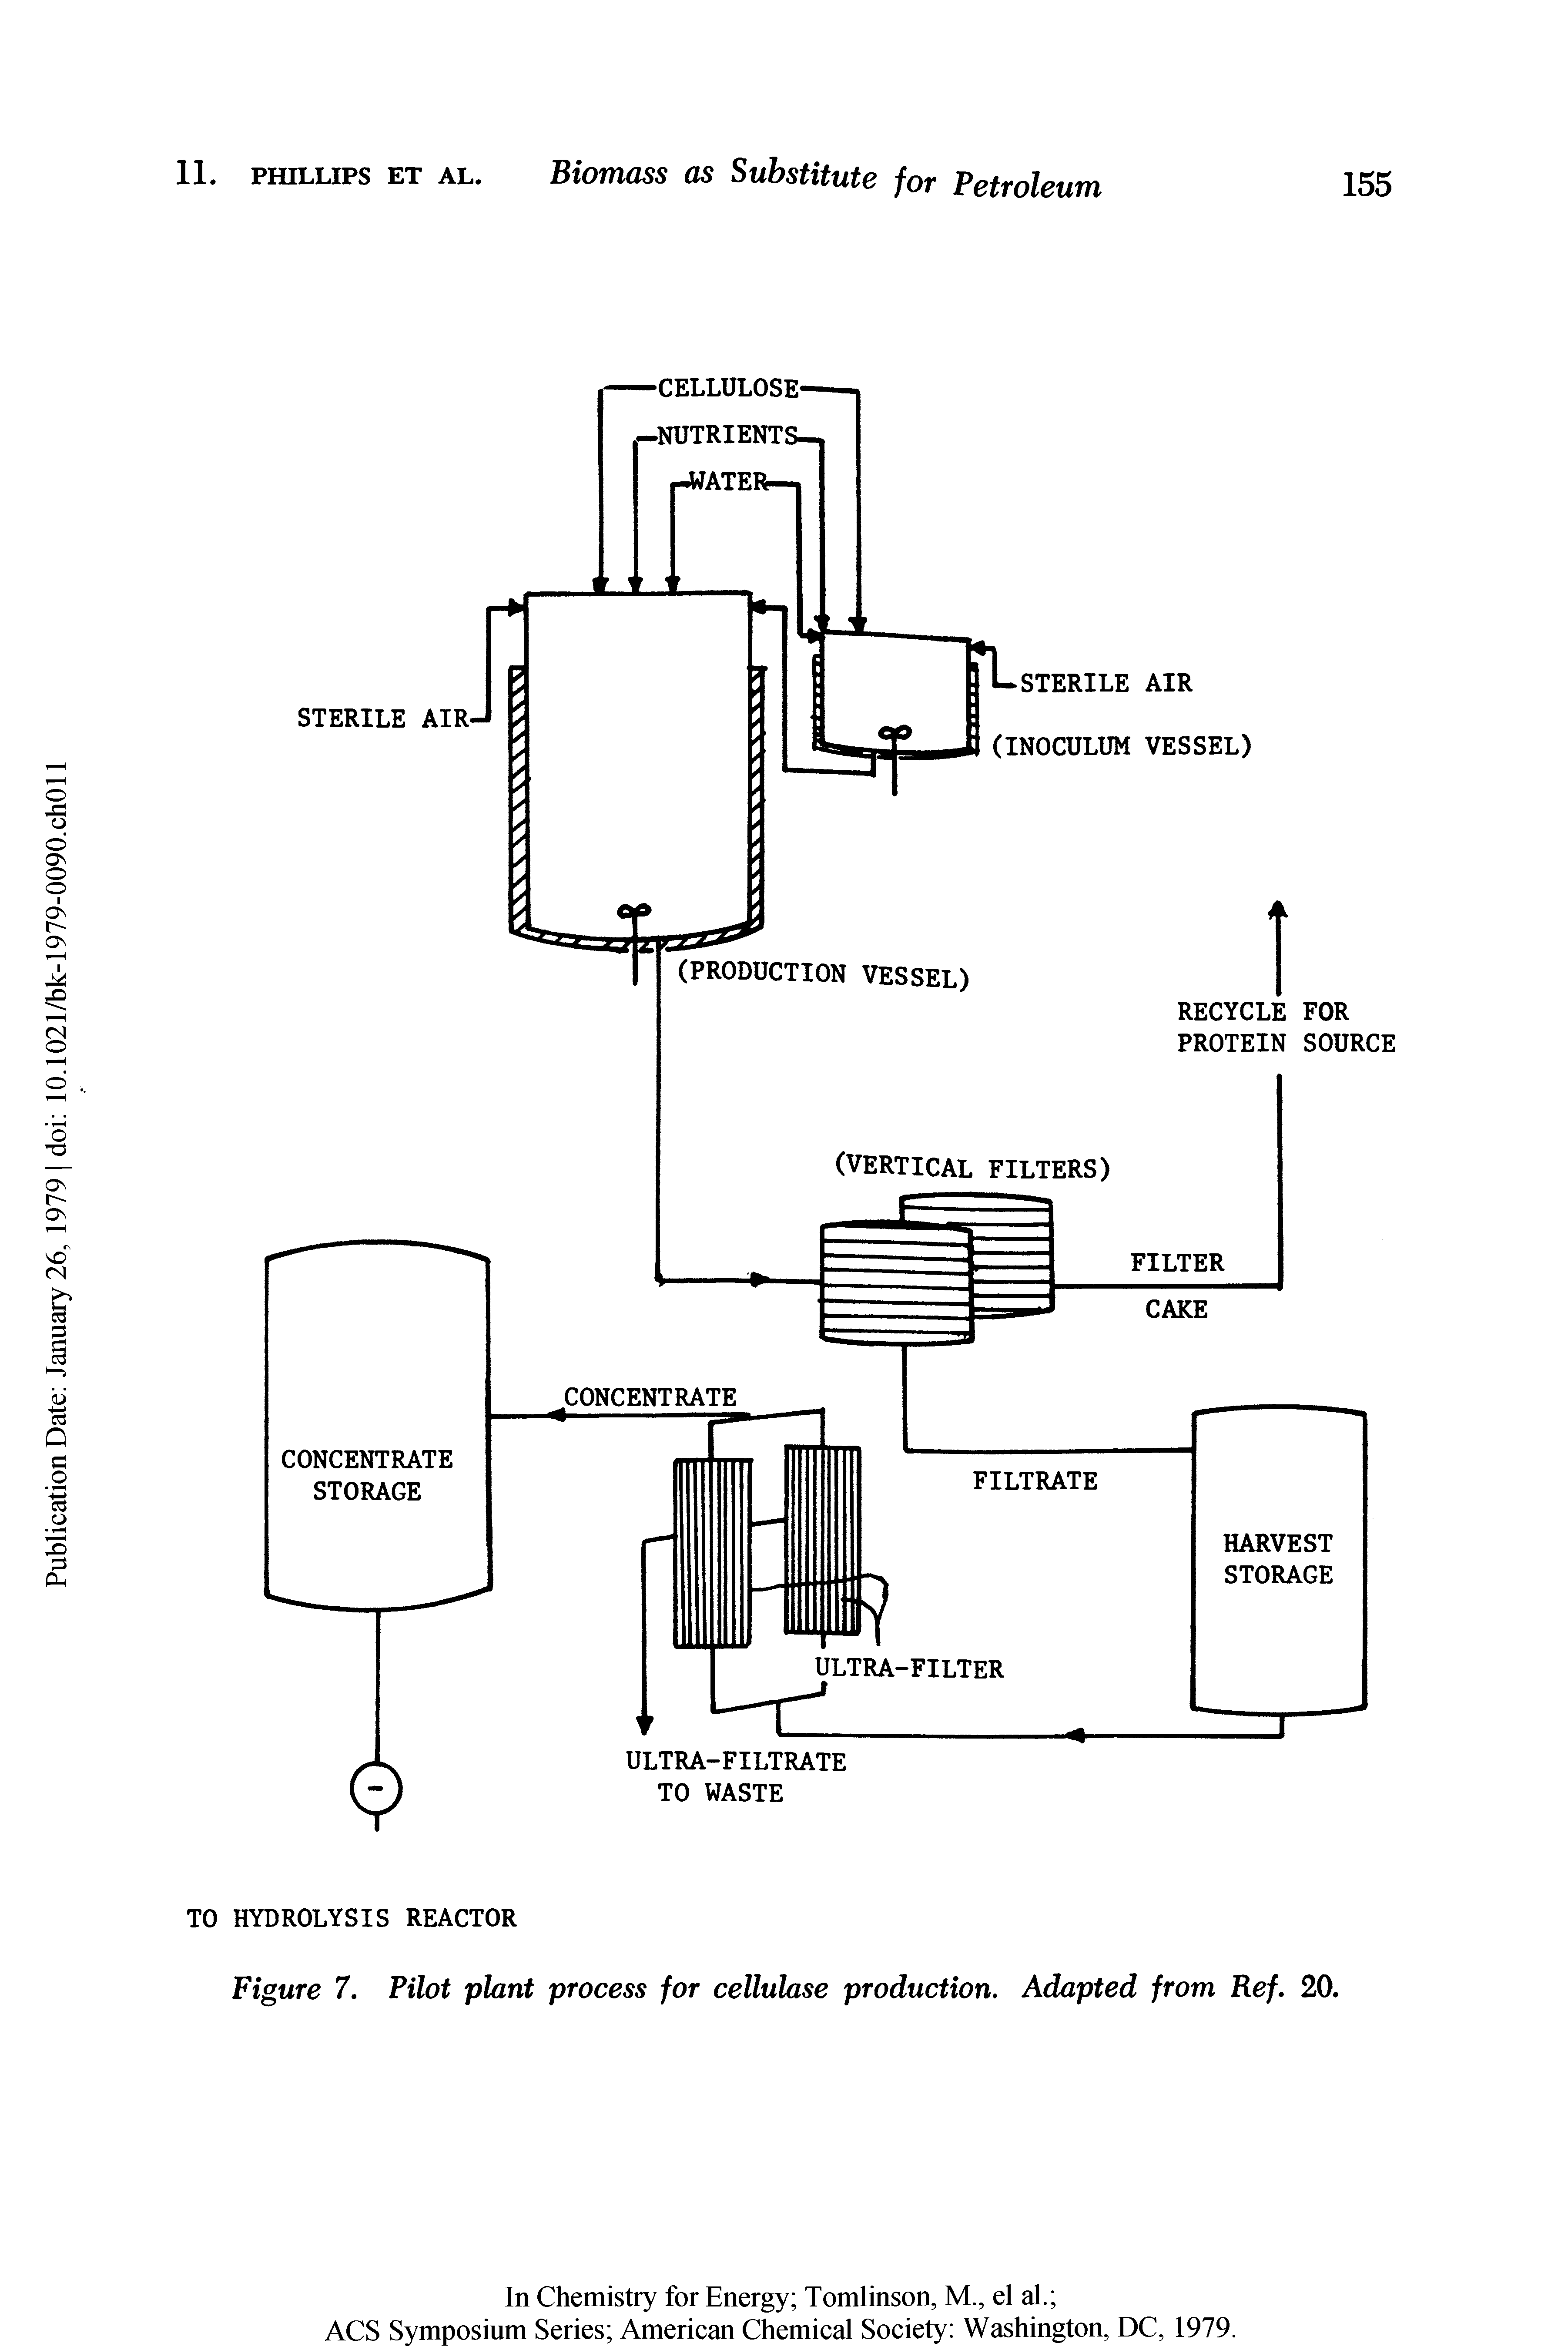 Figure 7. Pilot plant process for cellulase production. Adapted from Ref. 20.